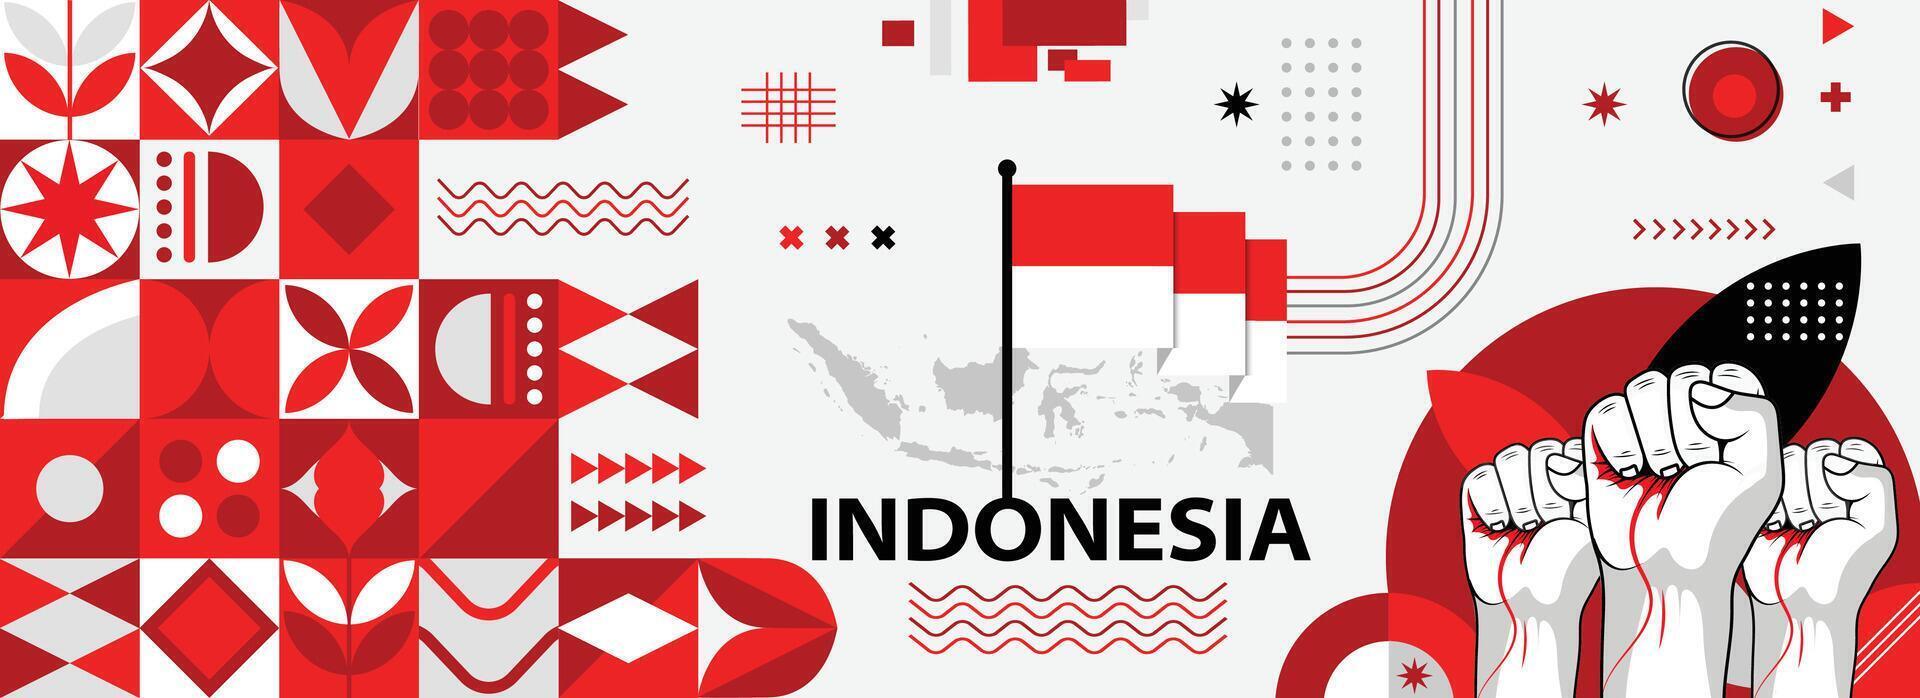 Indonesia national or independence day banner for country celebration. Flag and map of Indonesia with raised fists. Modern retro design with typorgaphy abstract geometric icons. Vector illustration